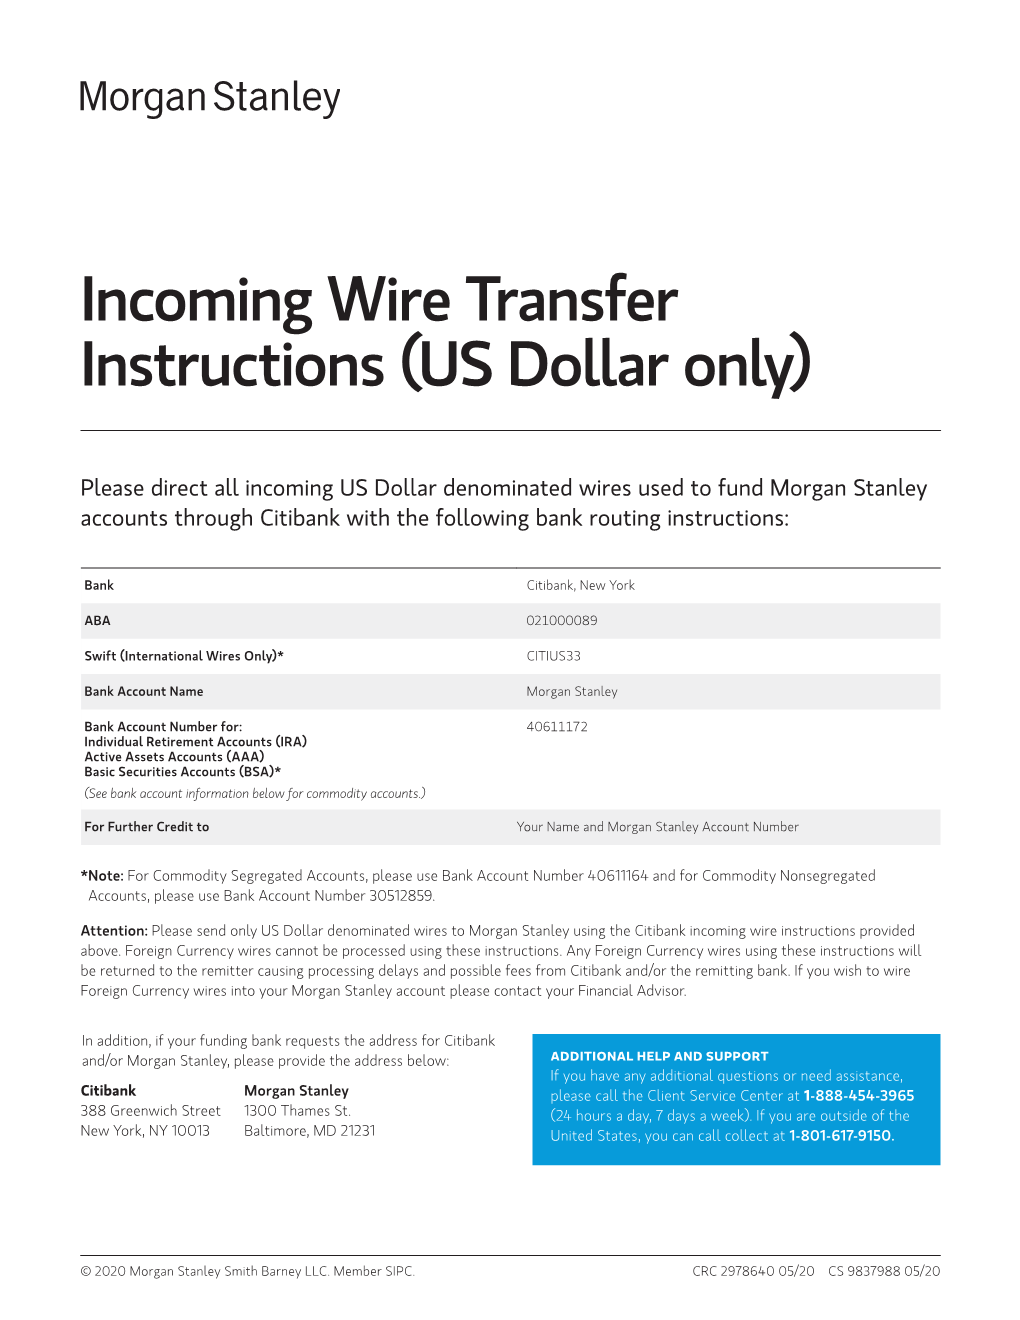 Incoming Wire Transfer Instructions (US Dollar Only)